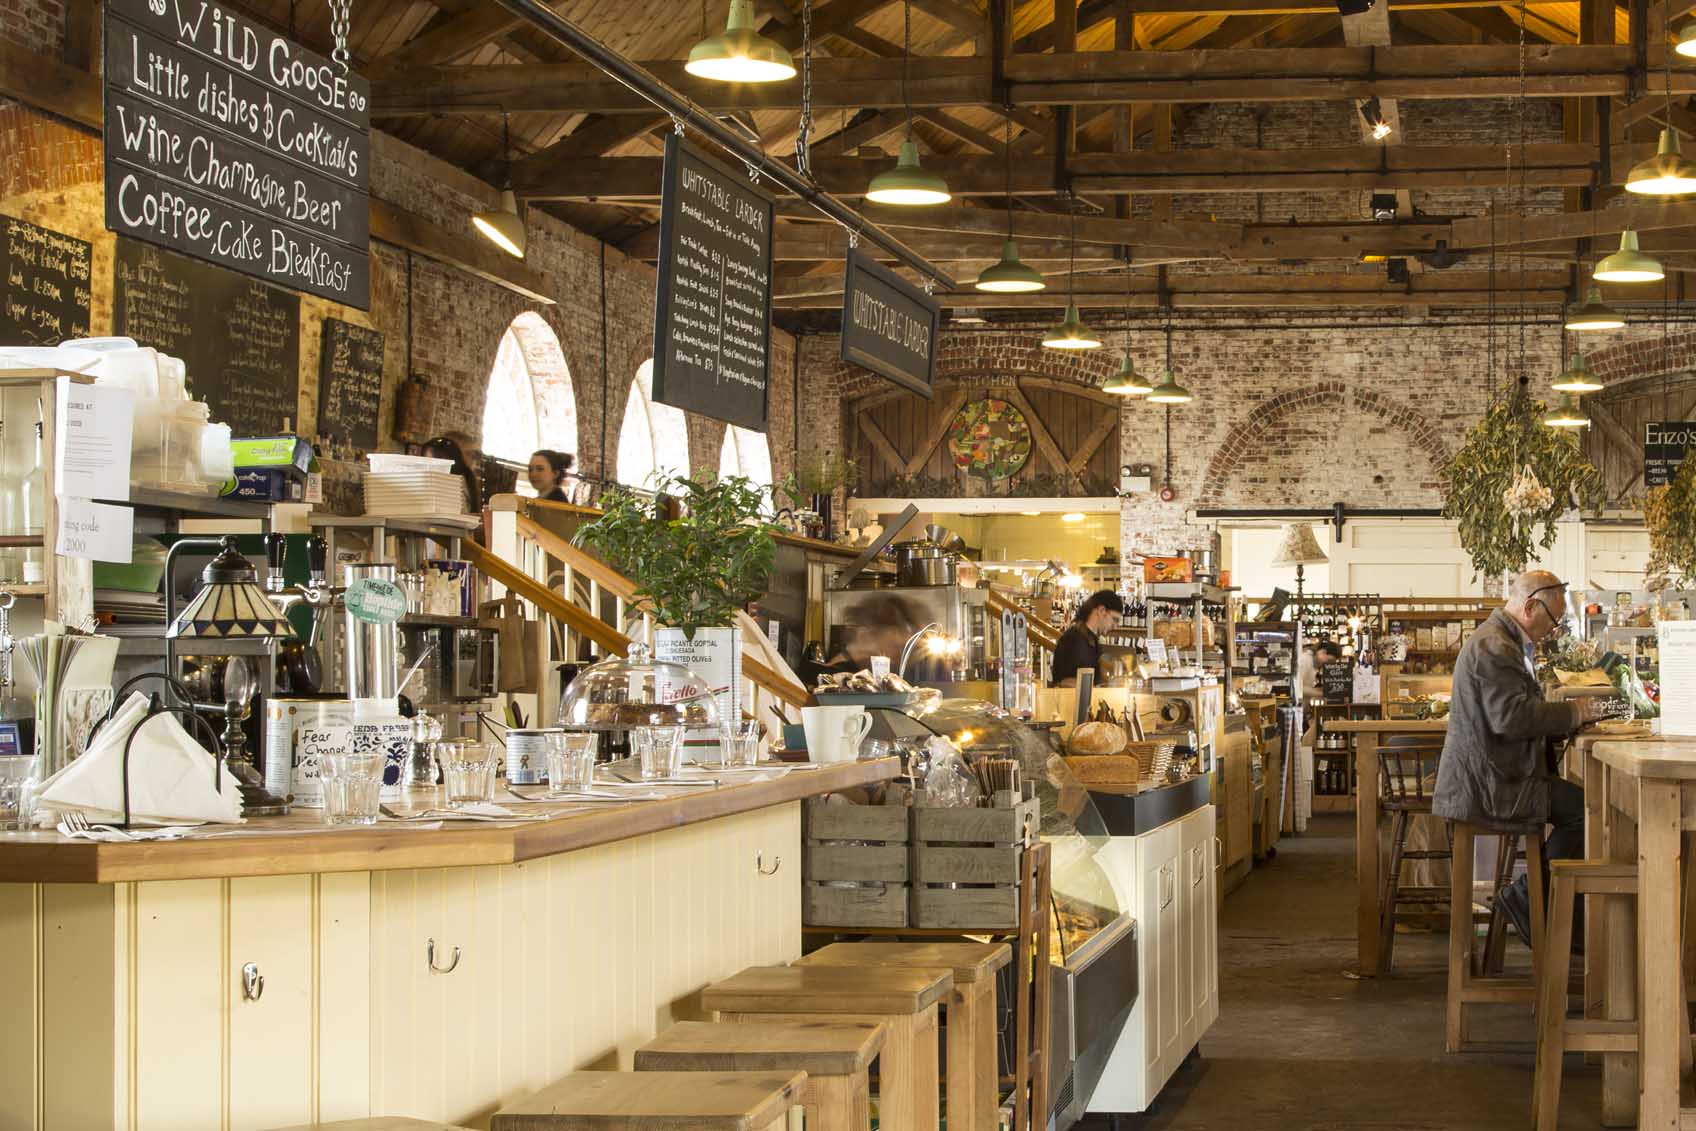 The Goods Shed restaurant